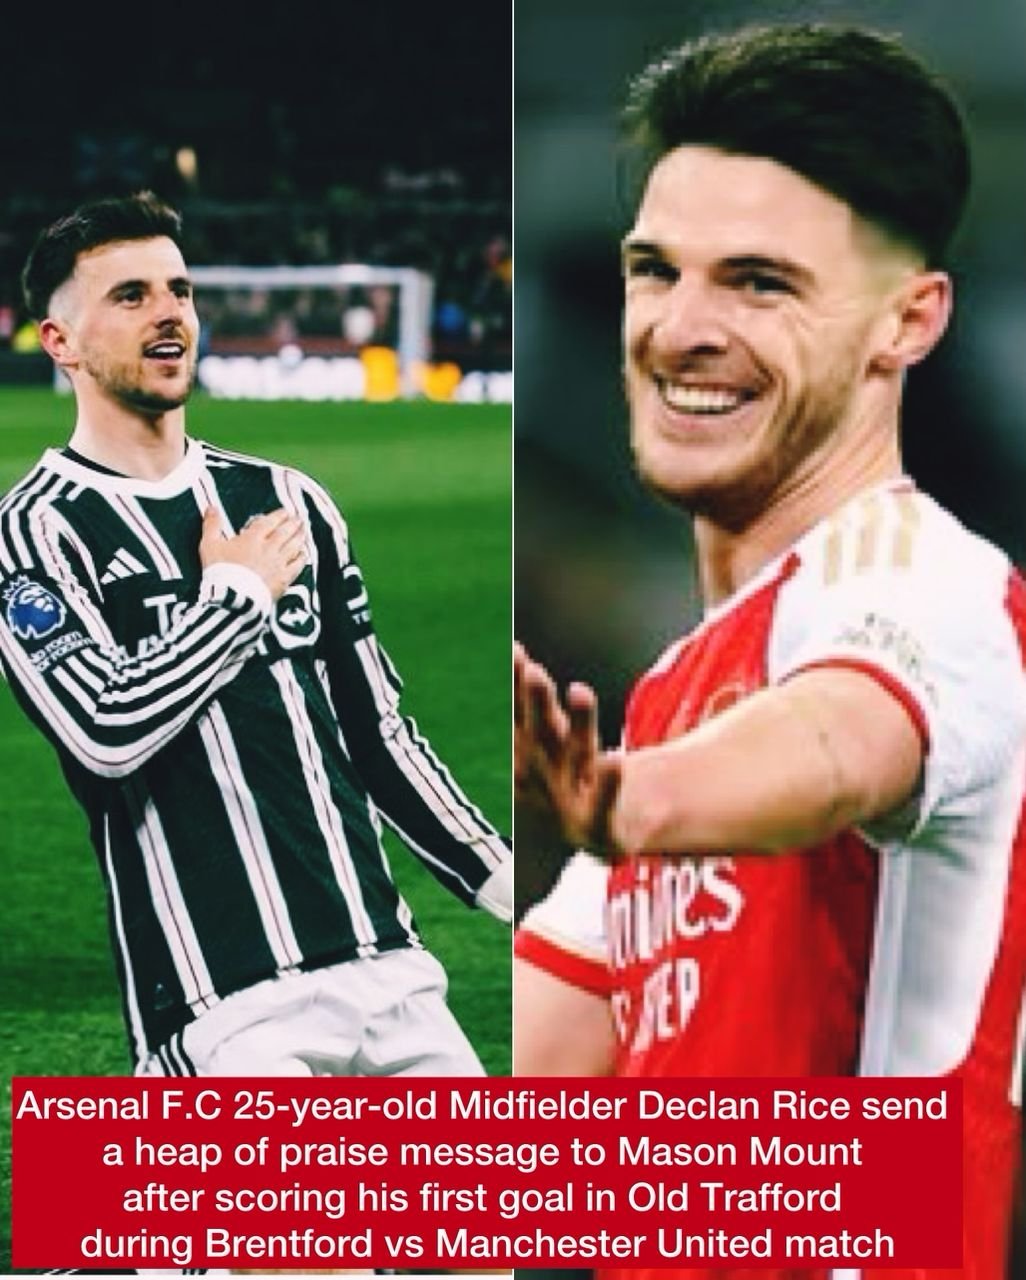 Arsenal F.C 25-year-old Midfielder Declan Rice send a a heap of praise message to Mason Mount after scoring his first goal in Old Trafford during Brentford vs Manchester United match